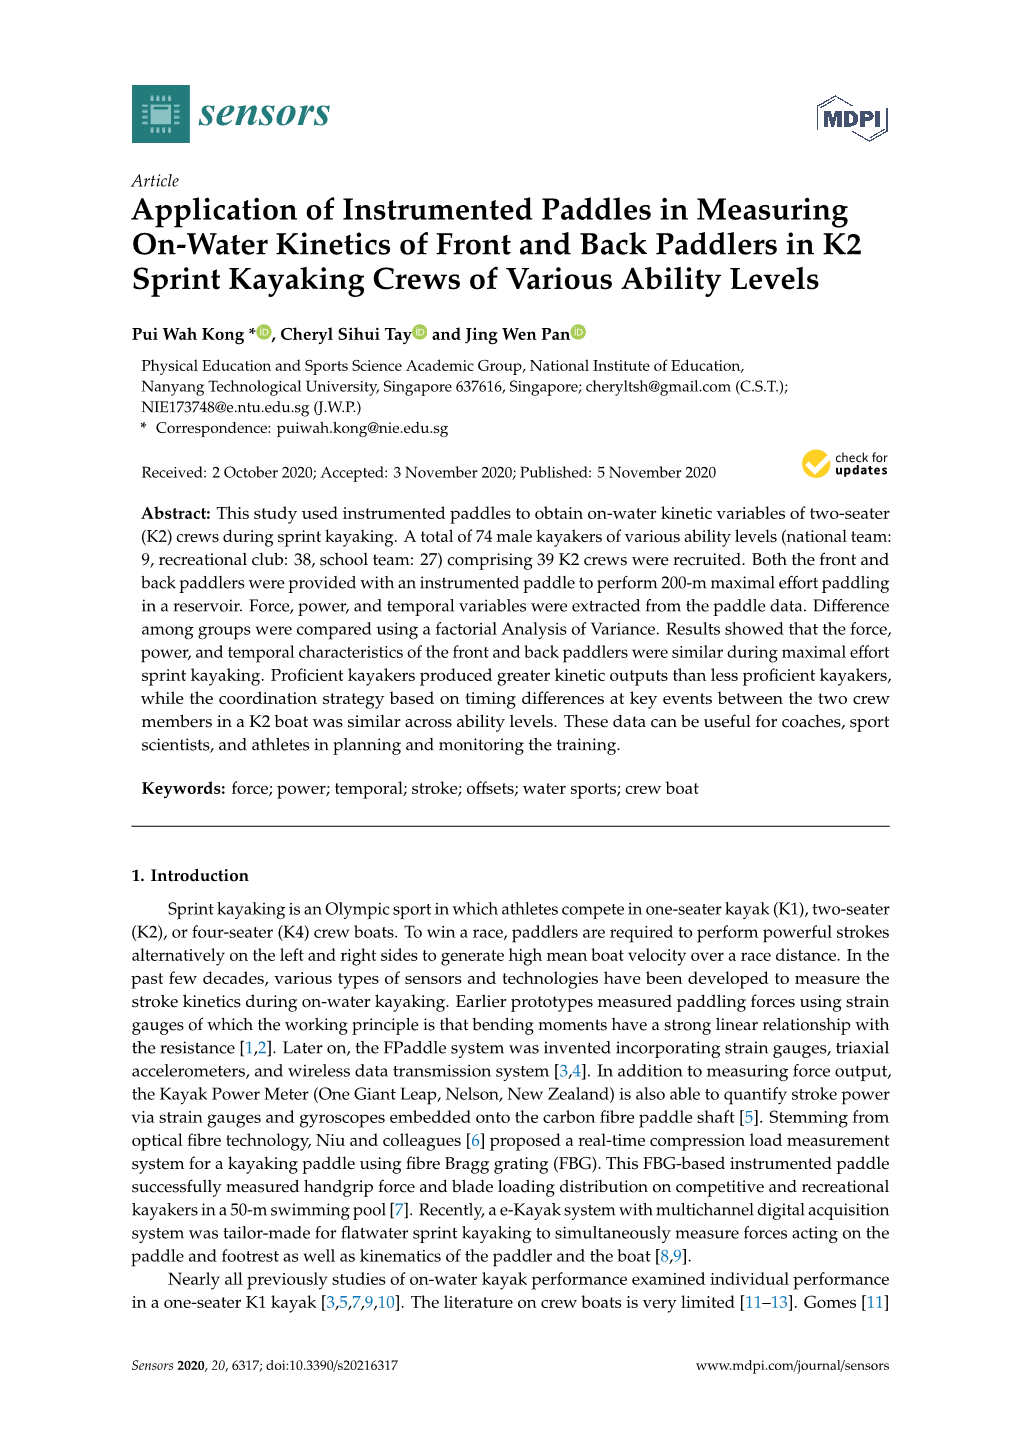 Application of Instrumented Paddles in Measuring On-Water Kinetics of Front and Back Paddlers in K2 Sprint Kayaking Crews of Various Ability Levels